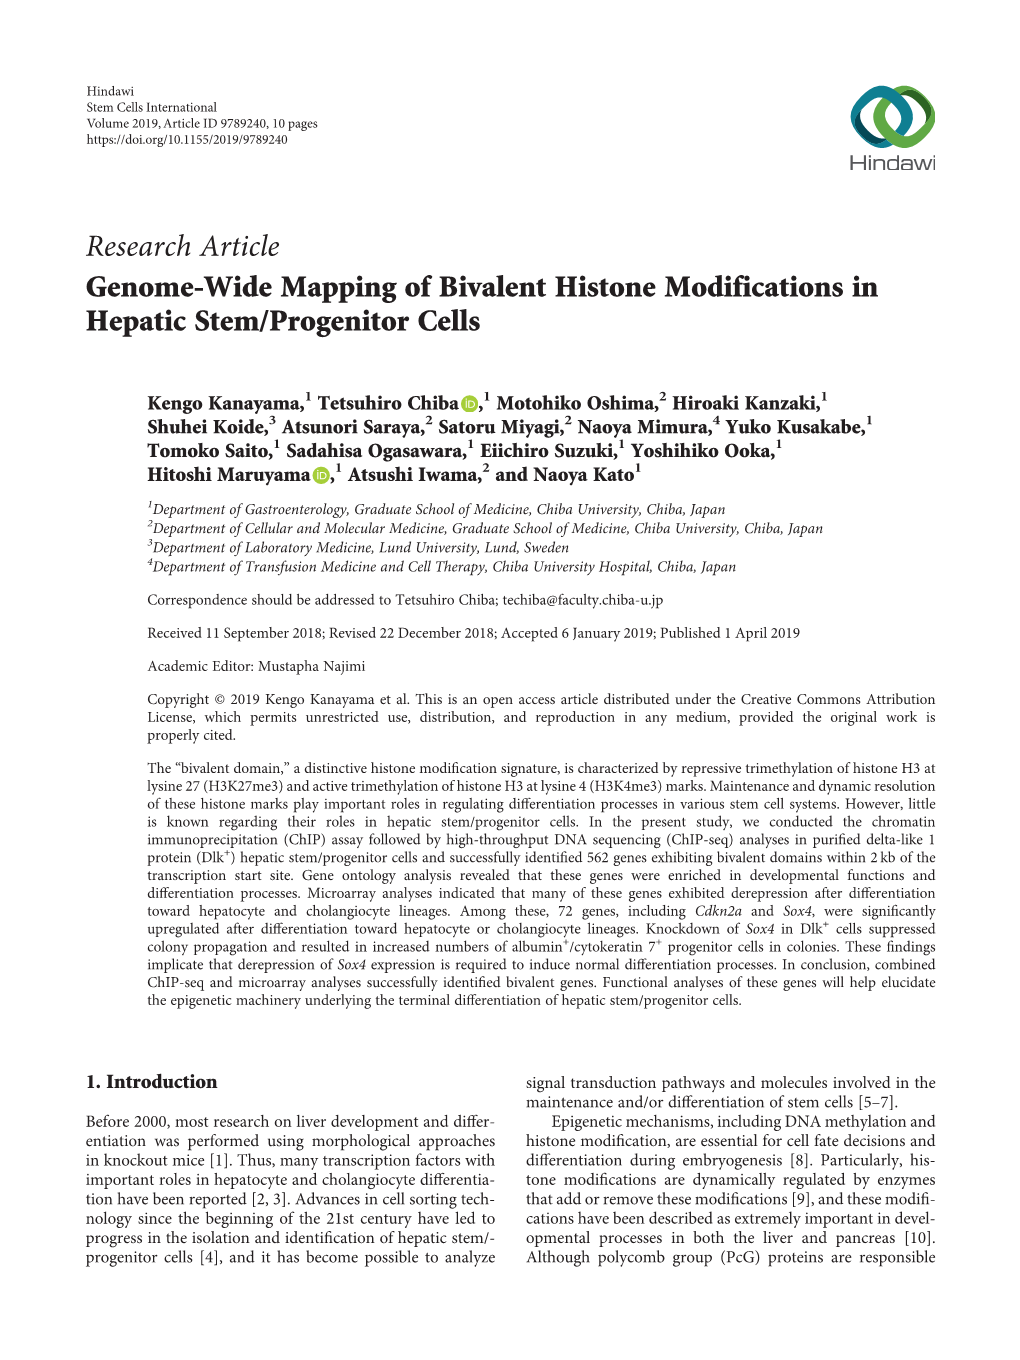 Genome-Wide Mapping of Bivalent Histone Modifications in Hepatic Stem/Progenitor Cells